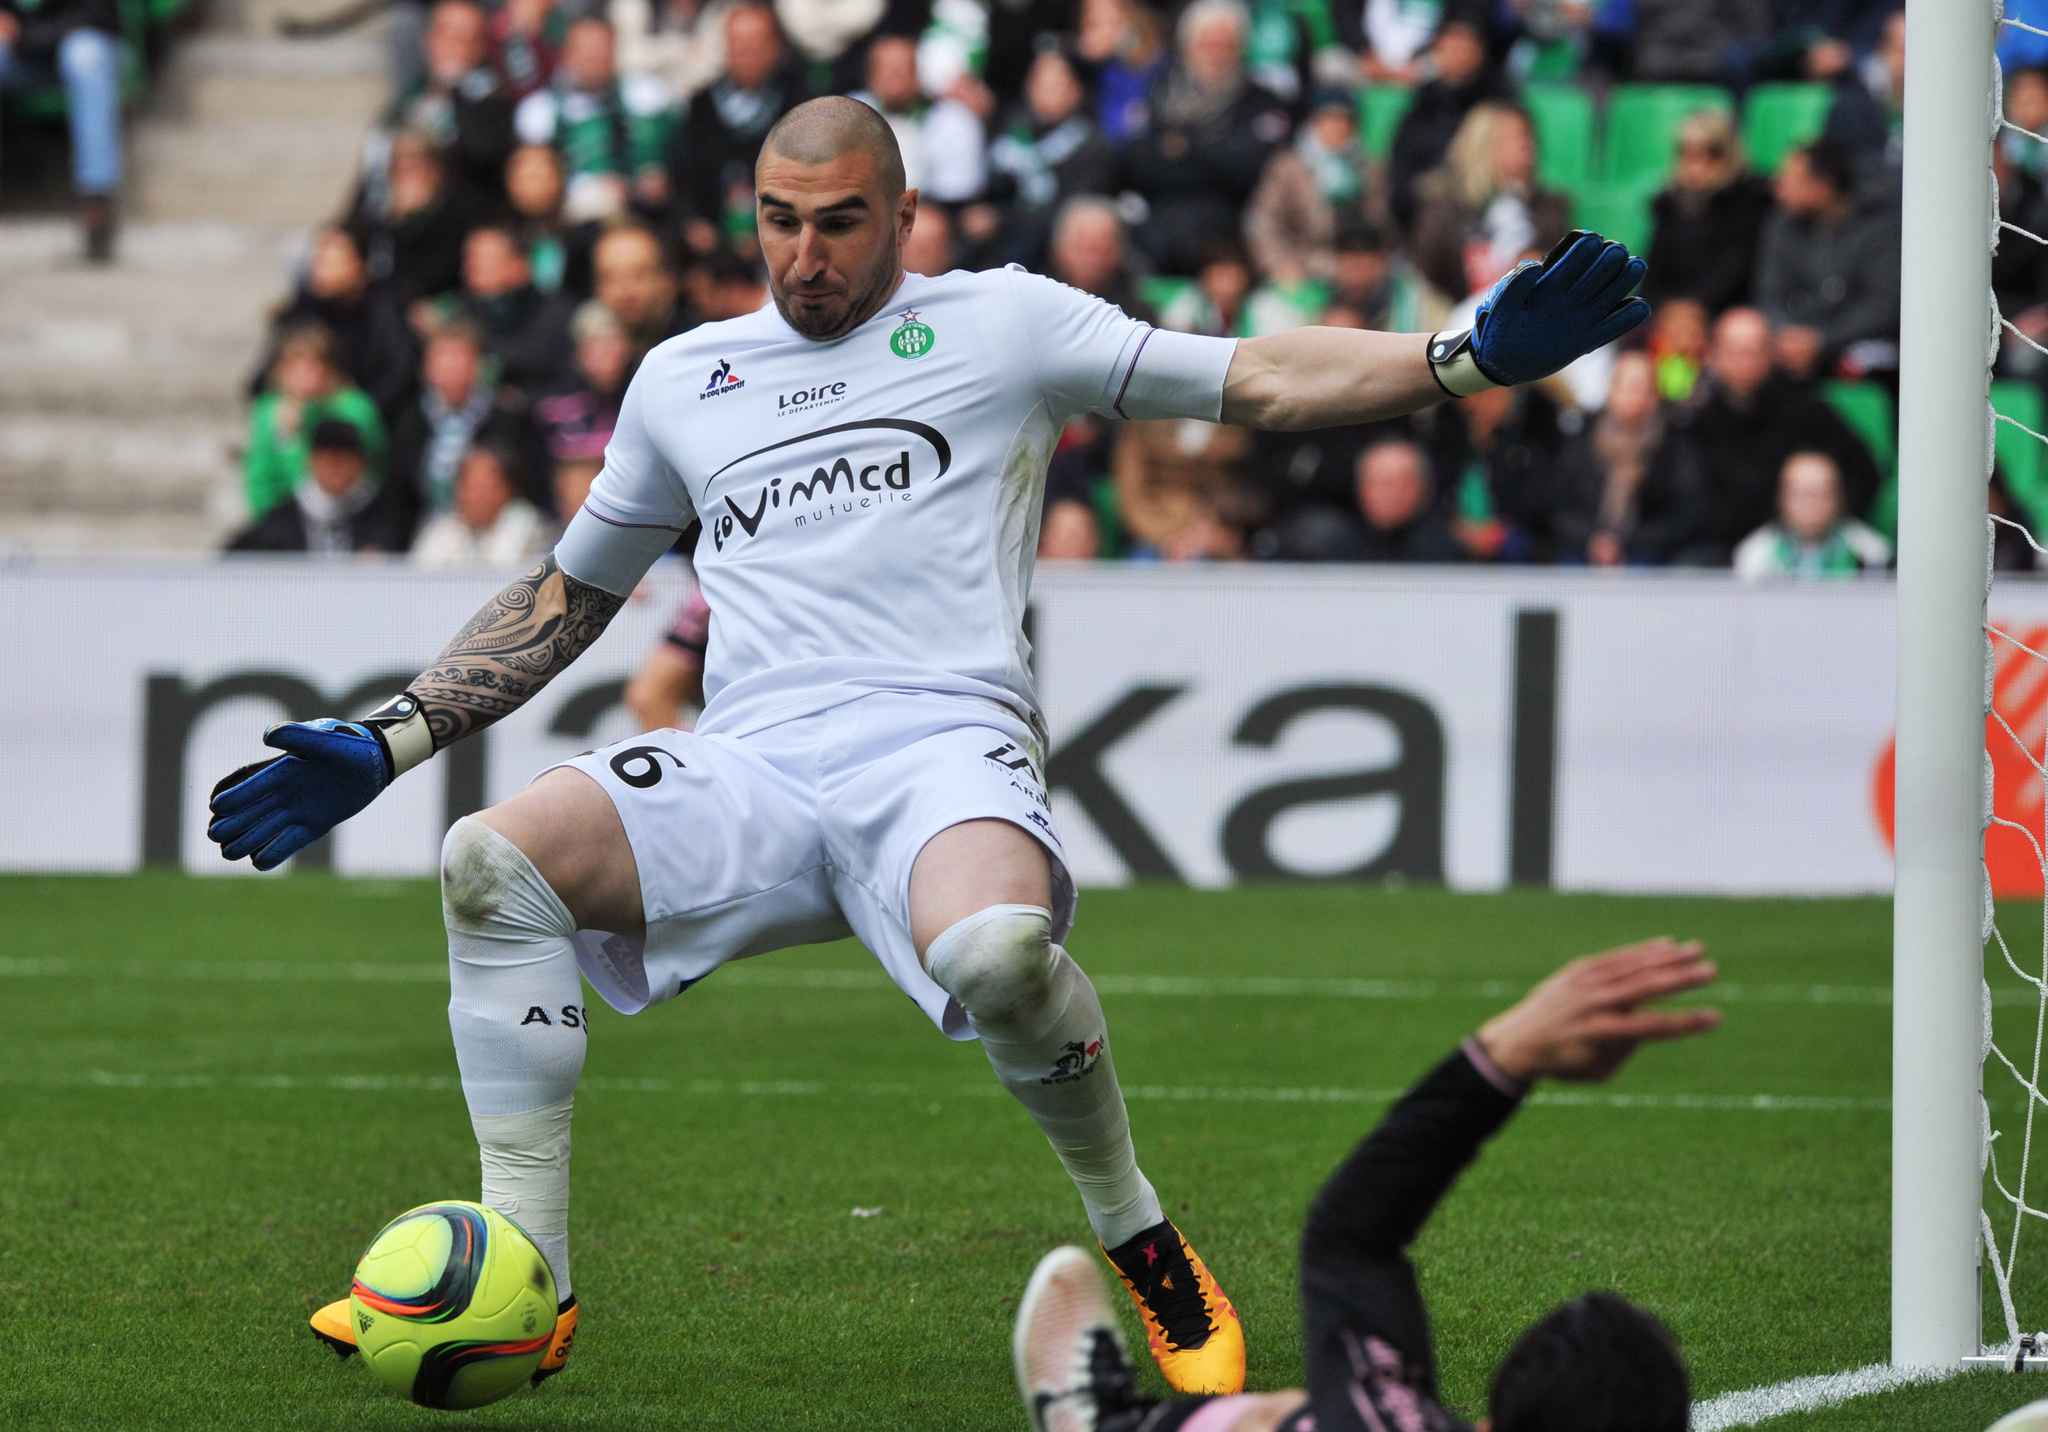 2048x1536-fit_saint-etienne-s-french-goalkeeper-stephane-ruffier-c-stops-the-ball-during-the-french-l1-football